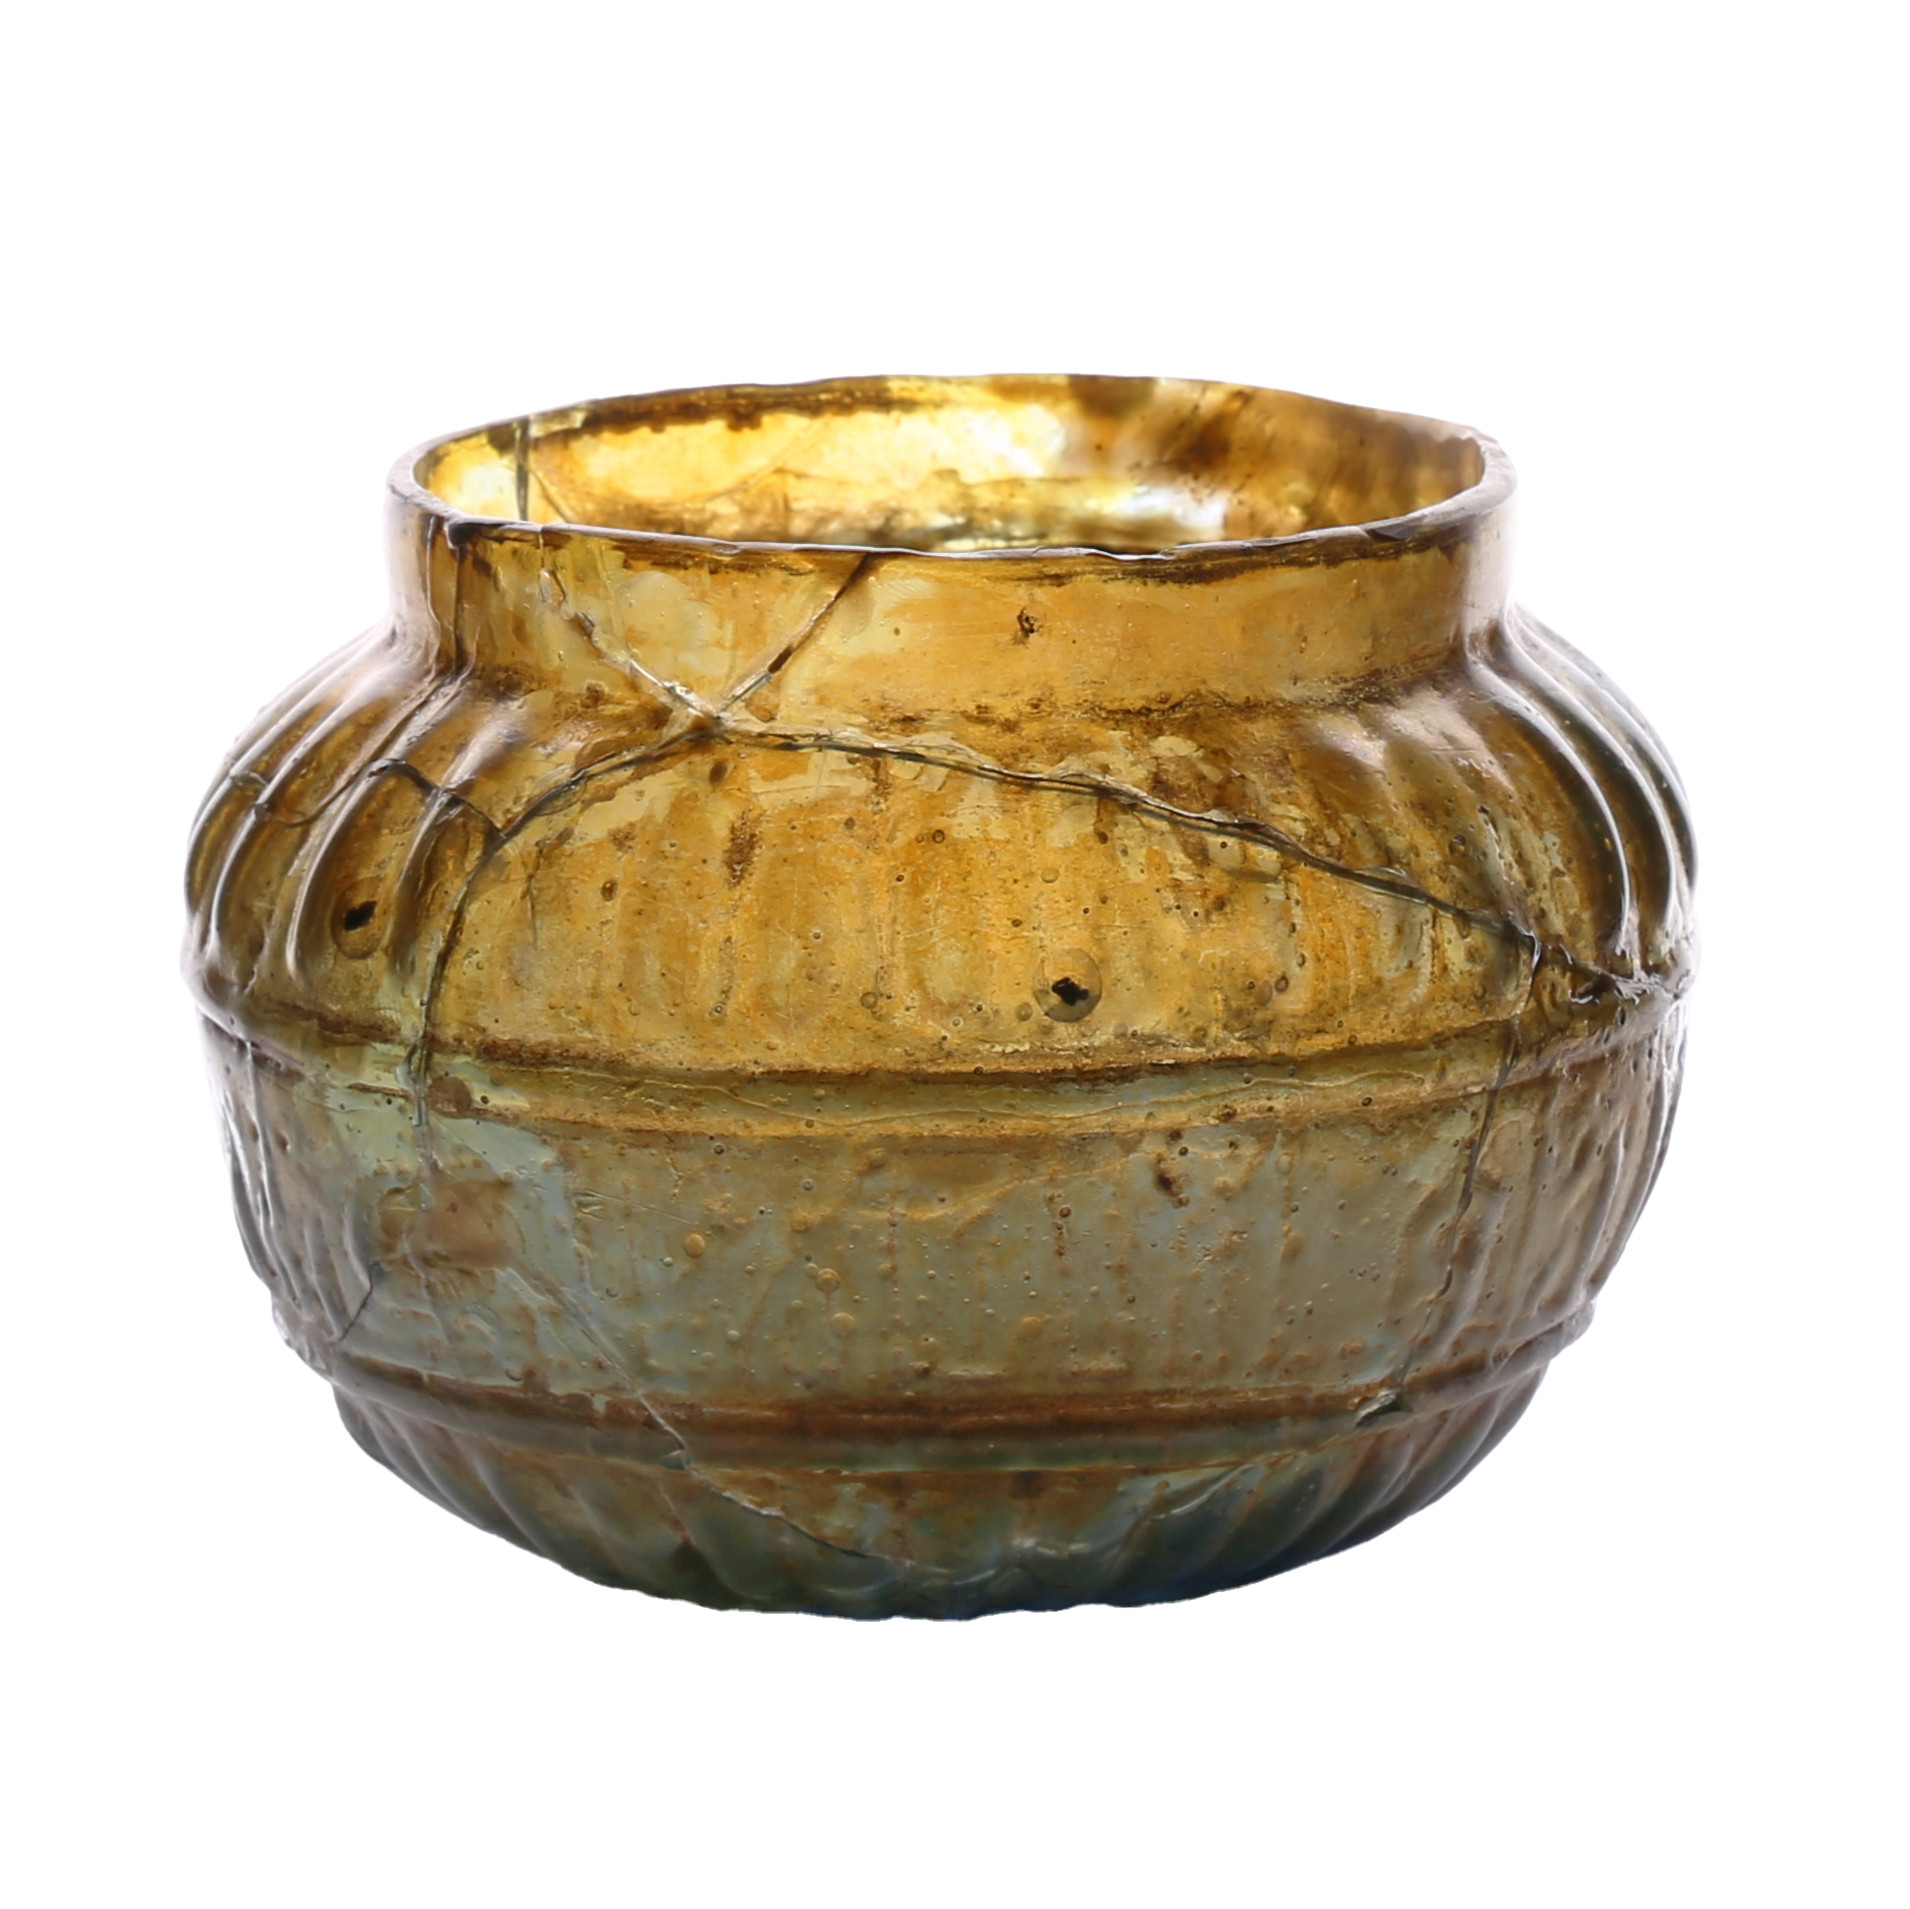 A ROMAN GLASS BOWL, 2ND – 3RD CENTURY A.D. - Image 2 of 2